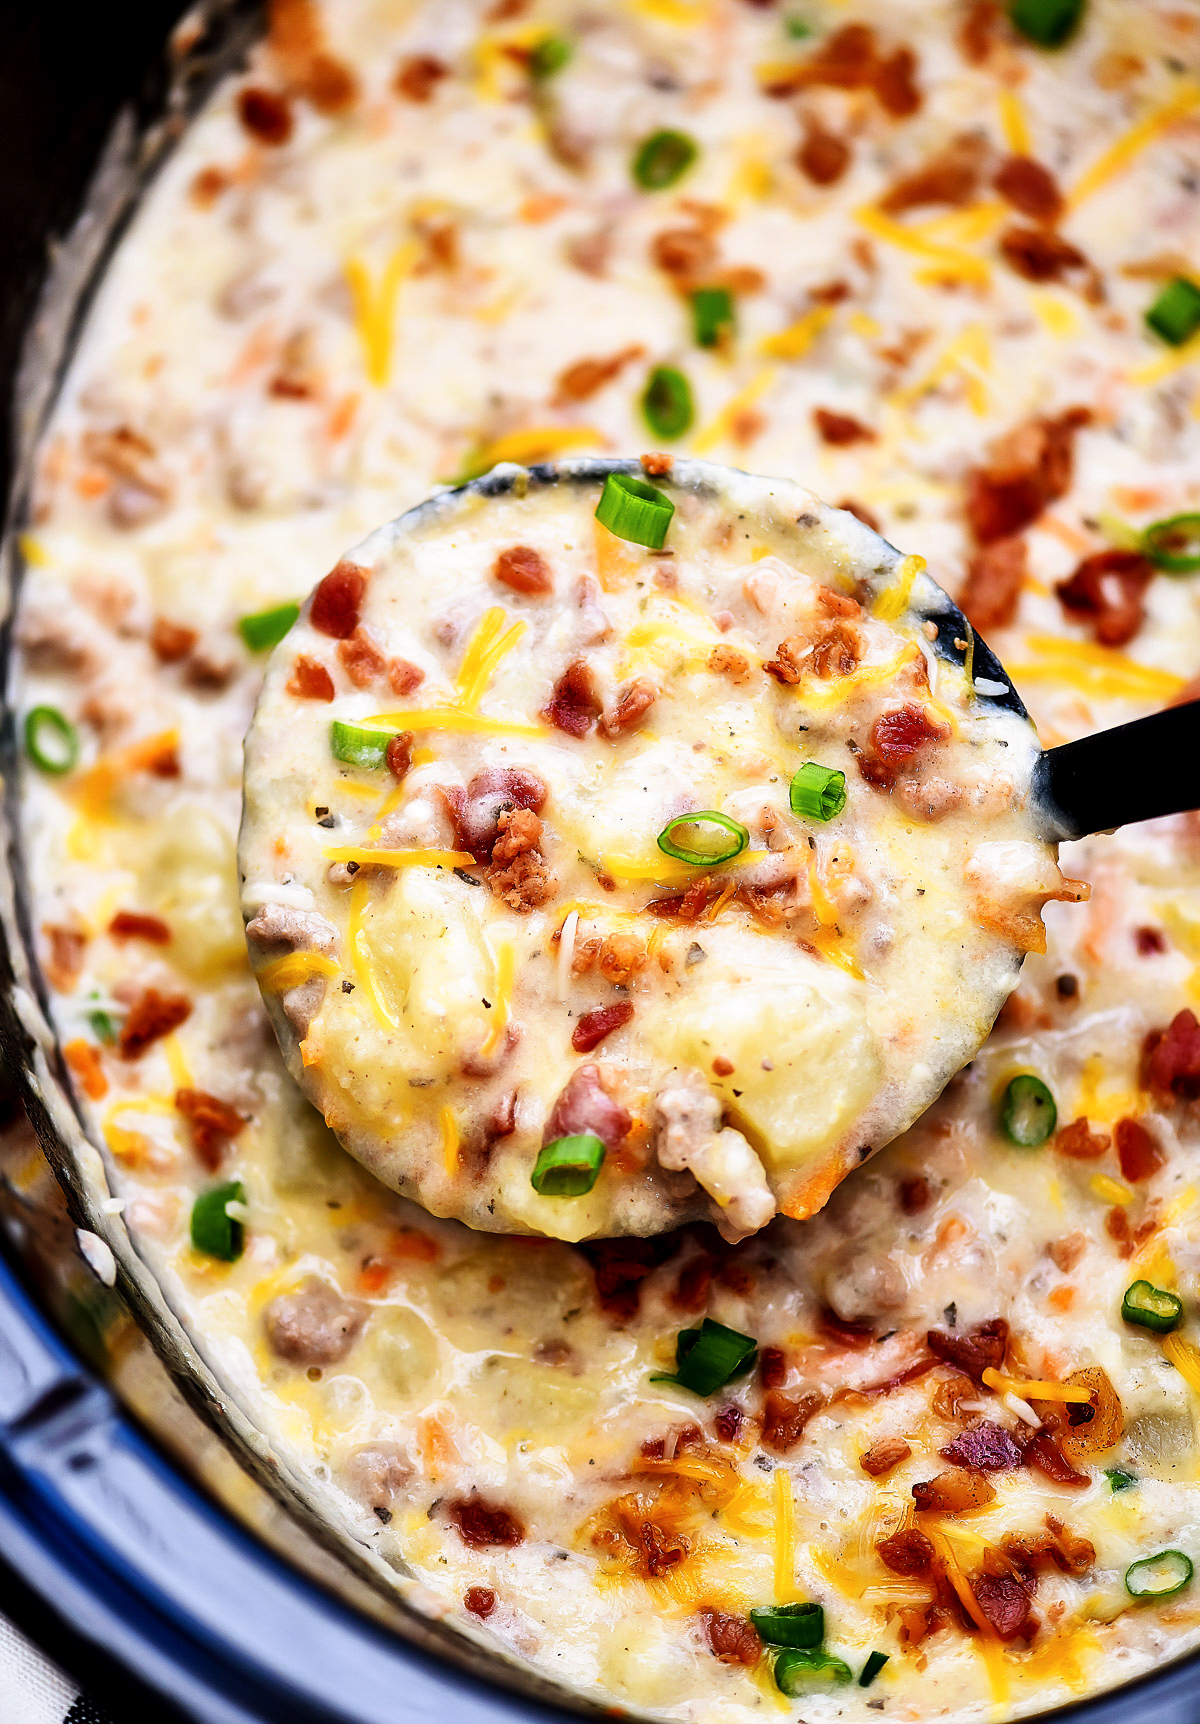 Bacon Cheeseburger soup is slow cooked soup loaded with potatoes, ground beef, cheese and bacon. Life-in-the-Lofthouse.com